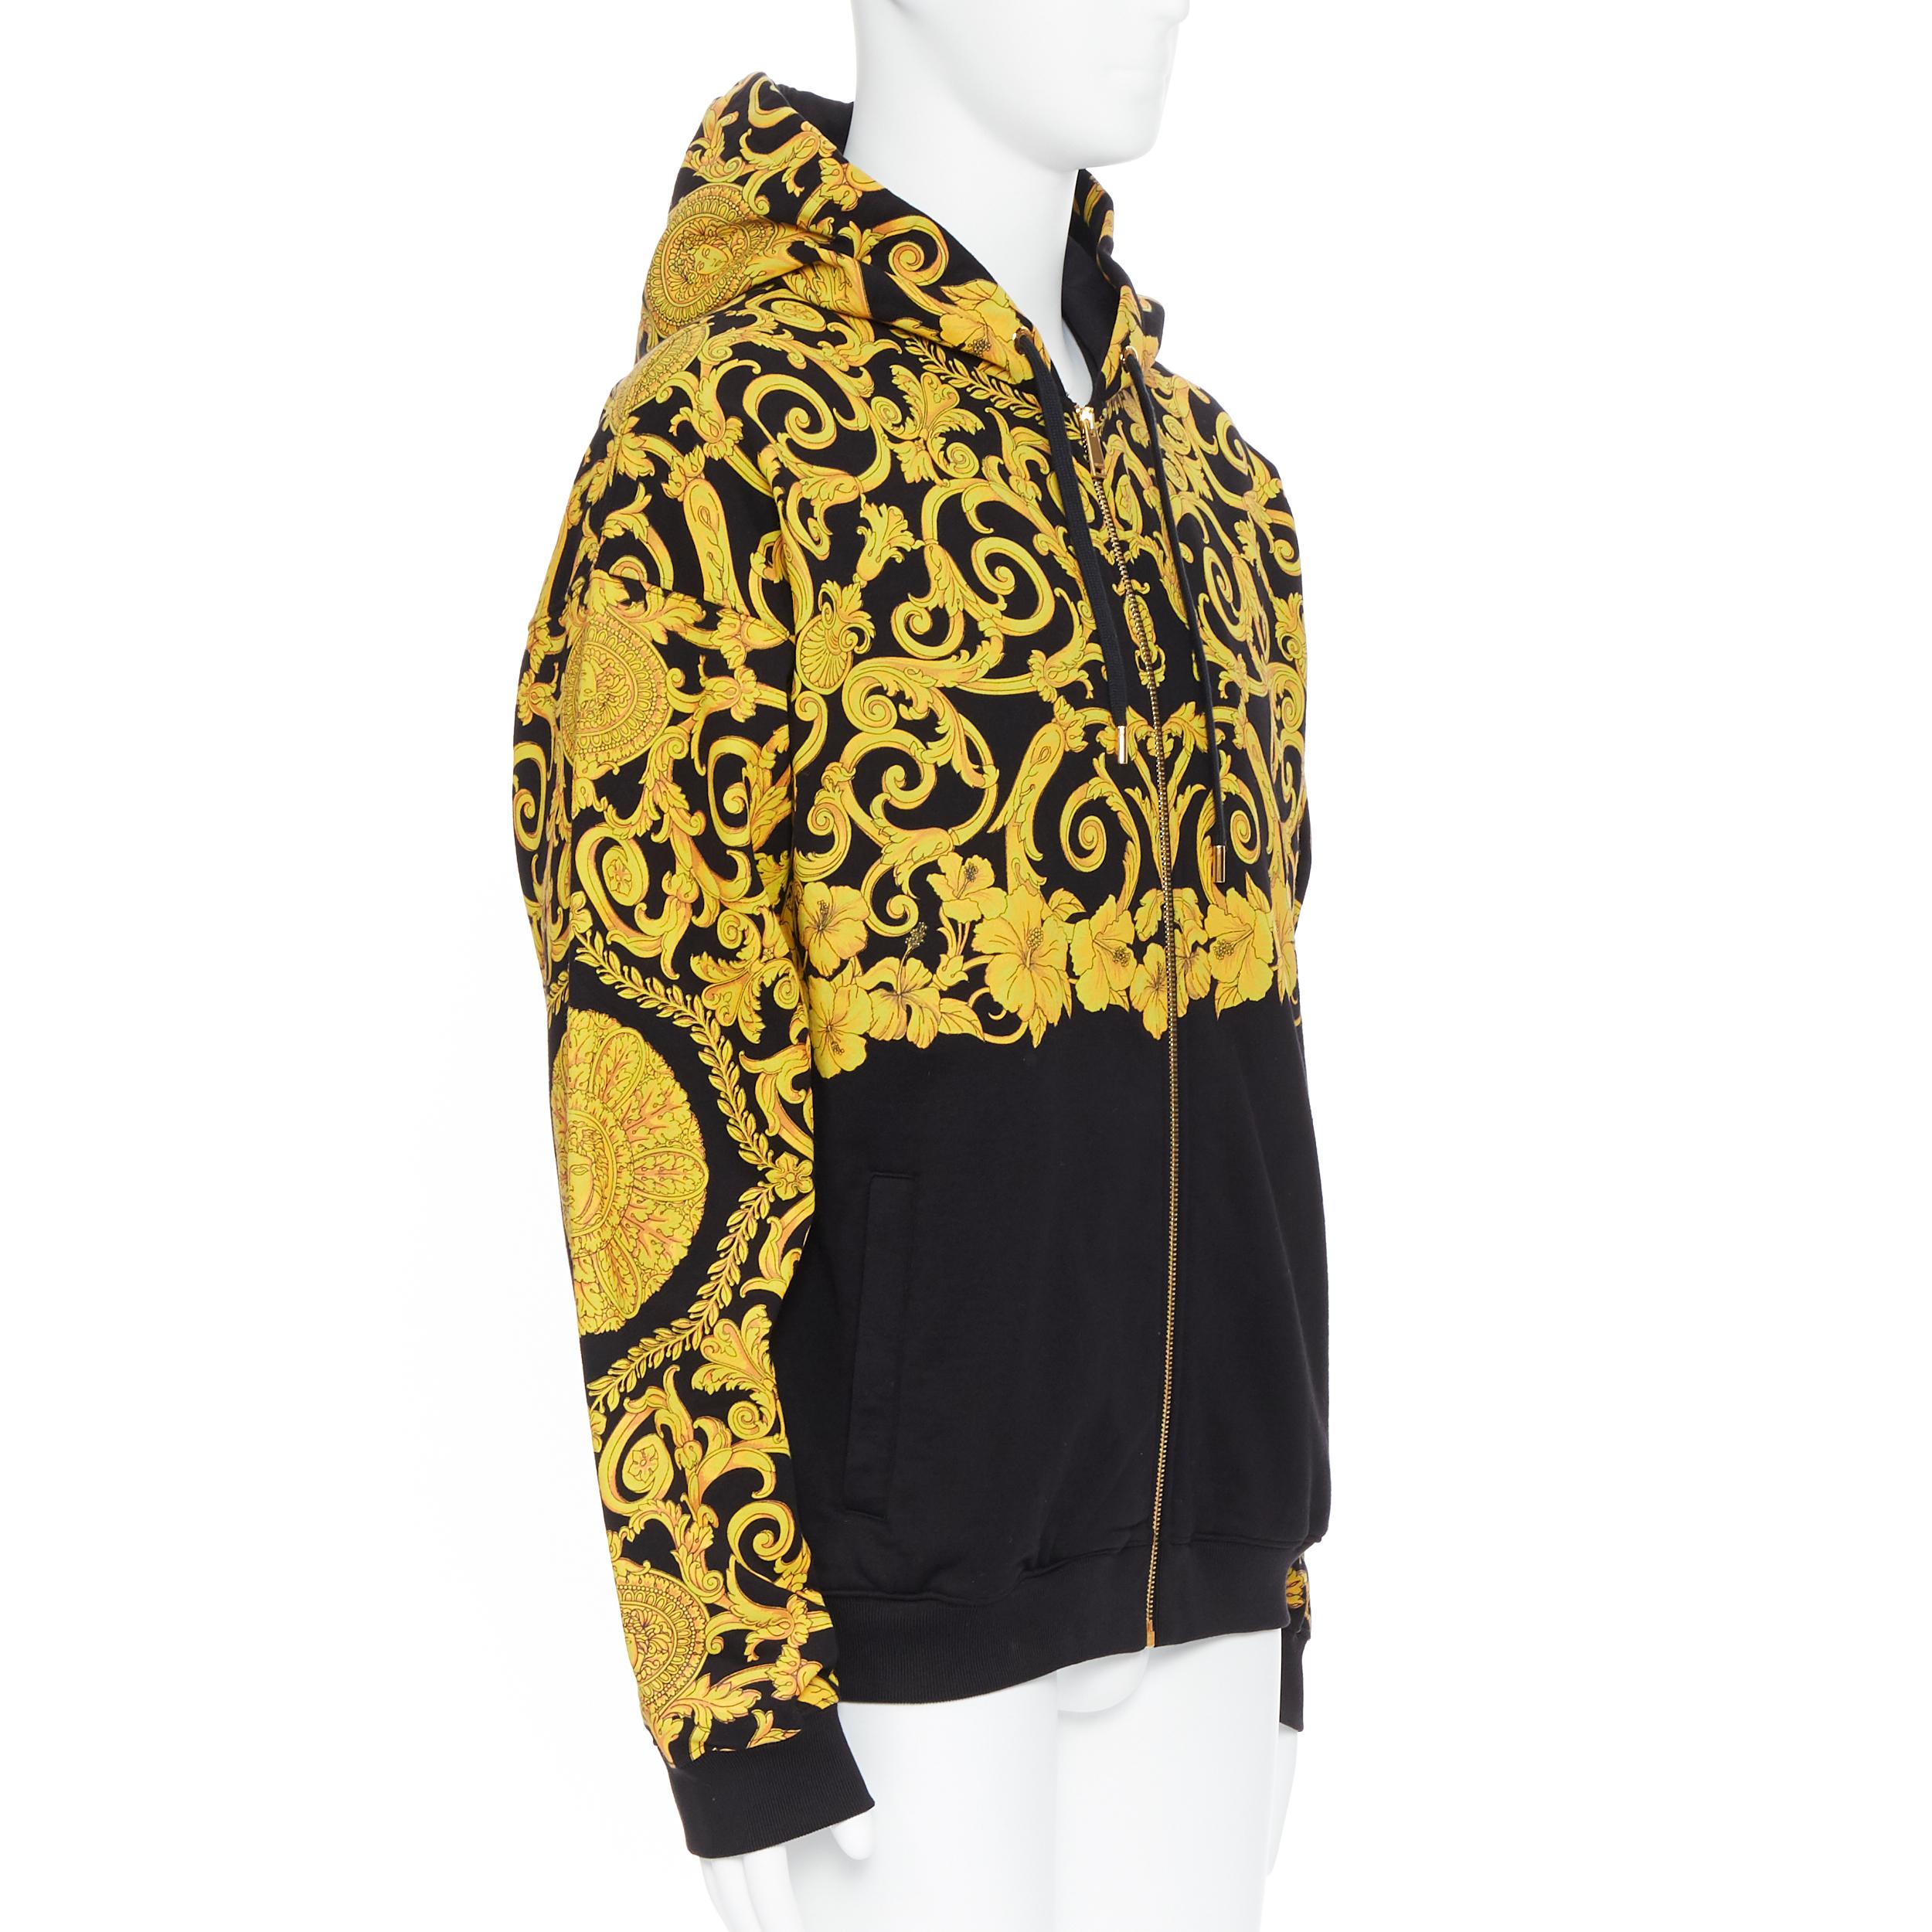 new VERSACE gold Medusa baroque floral print black cotton casual zip hoodie XL
Brand: Versace
Designer: Donatella Versace
Collection: 2019
Model Name / Style: Baroque hoodie
Material: Cotton
Color: Black
Pattern: Floral
Closure: Zip
Extra Detail: